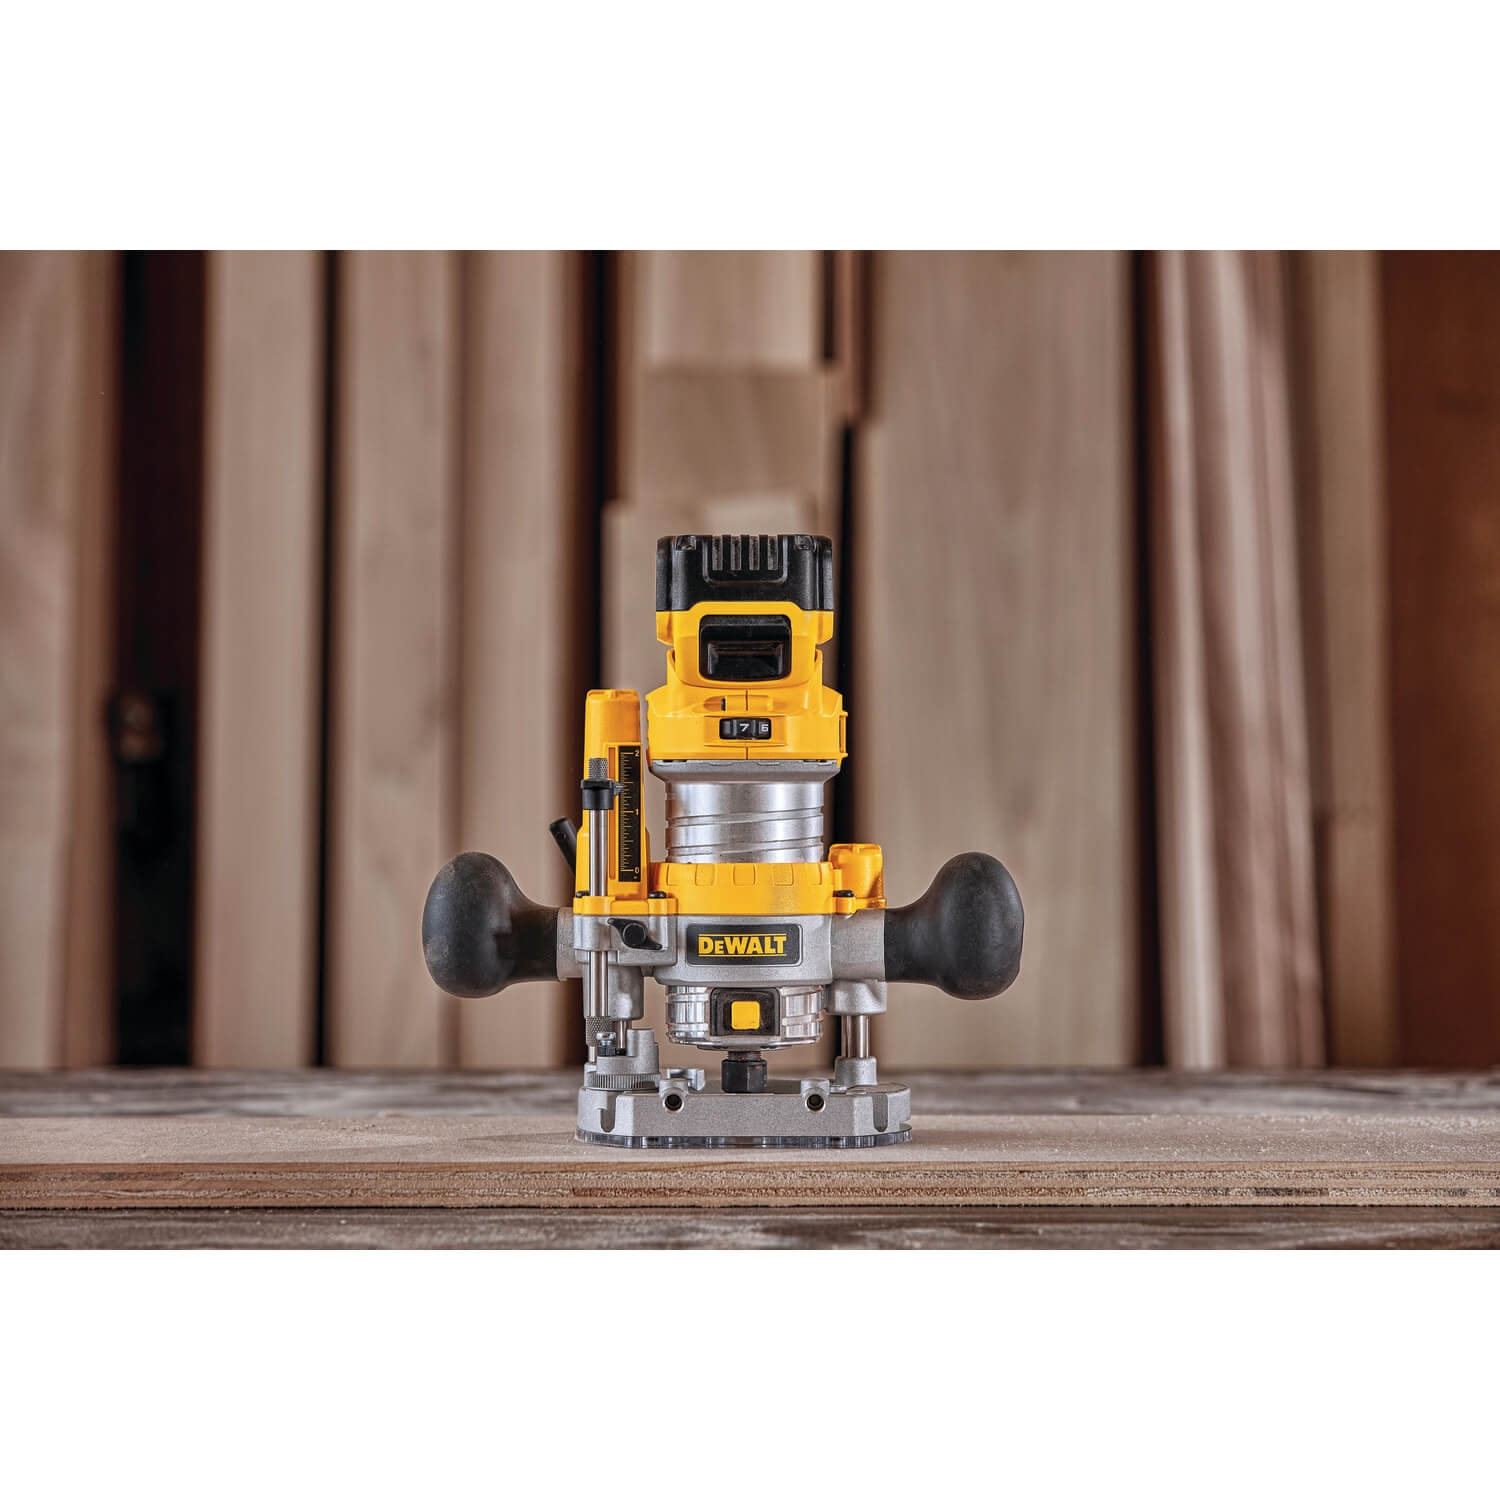 Dewalt DCW600B - 20V MAX COMPACT ROUTER - wise-line-tools